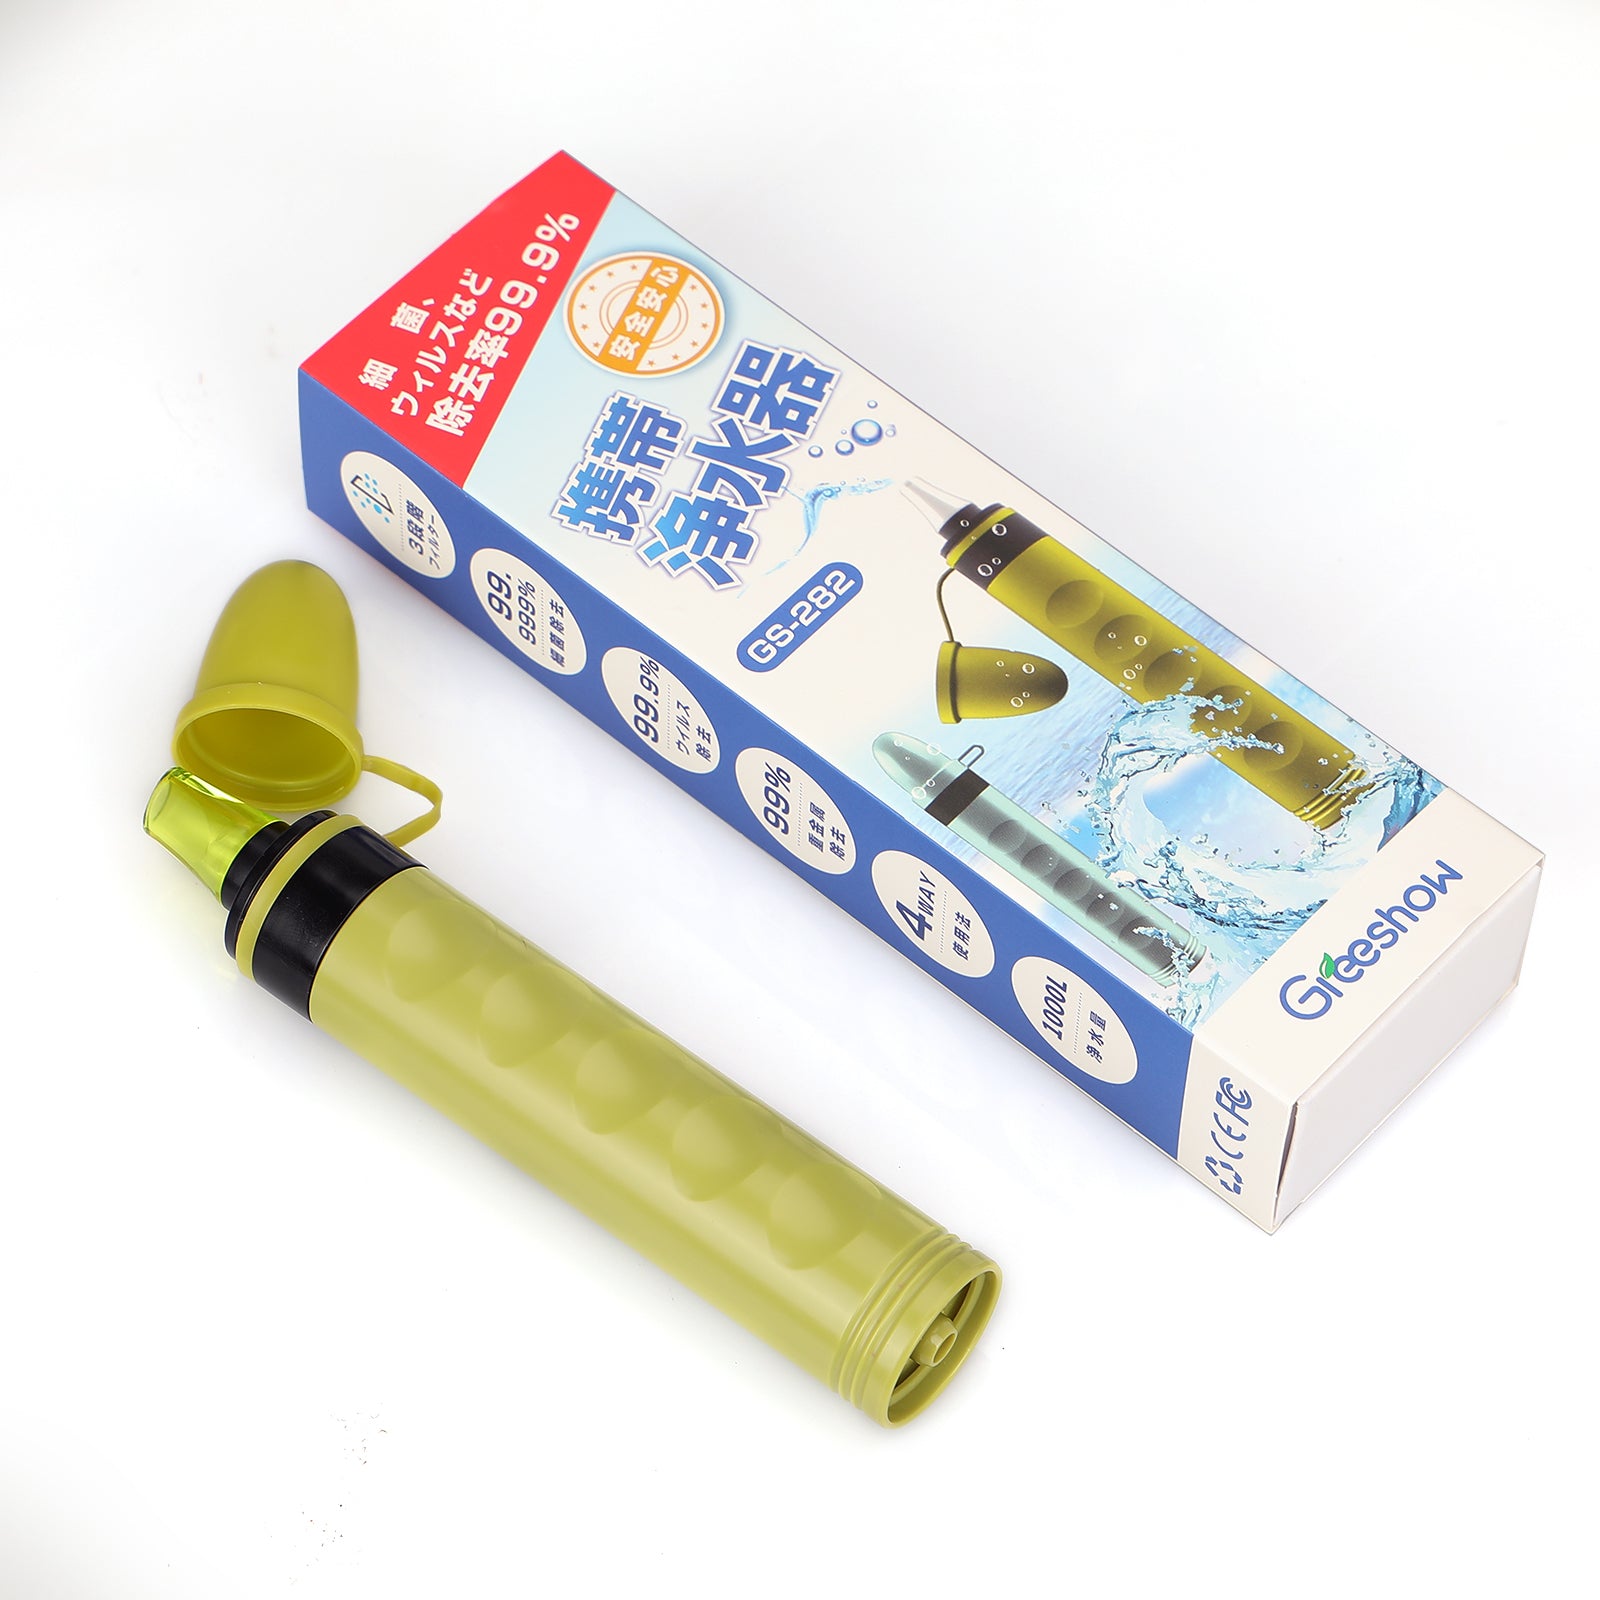 GREESHOW 3 STAGE WATER LIFE STRAW FILTER+3 REPLACEMENT FILTER Combo Package! - Greeshow Direct